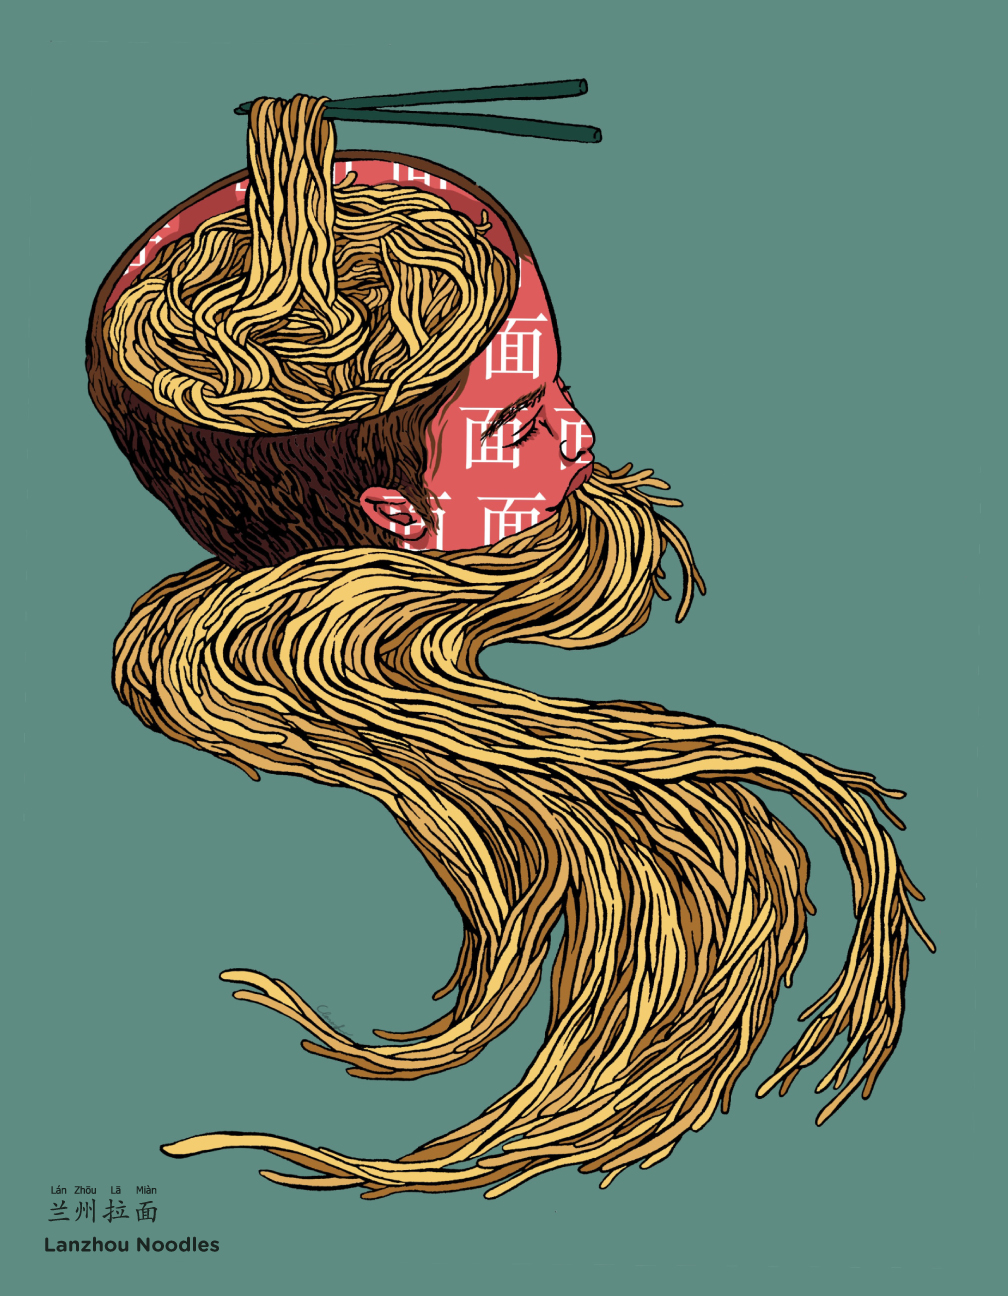 A digital drawing of a person's head that is also a bowl of noodles. In their head-bowl are hand-pulled Chinese lanzhou la mian and there are chopsticks lifting noodles up. The head-bowl is also slurping up noodles. The head-bowl is a pink-red and the noodles are dark yellow. The drawing is on a turquoise background.